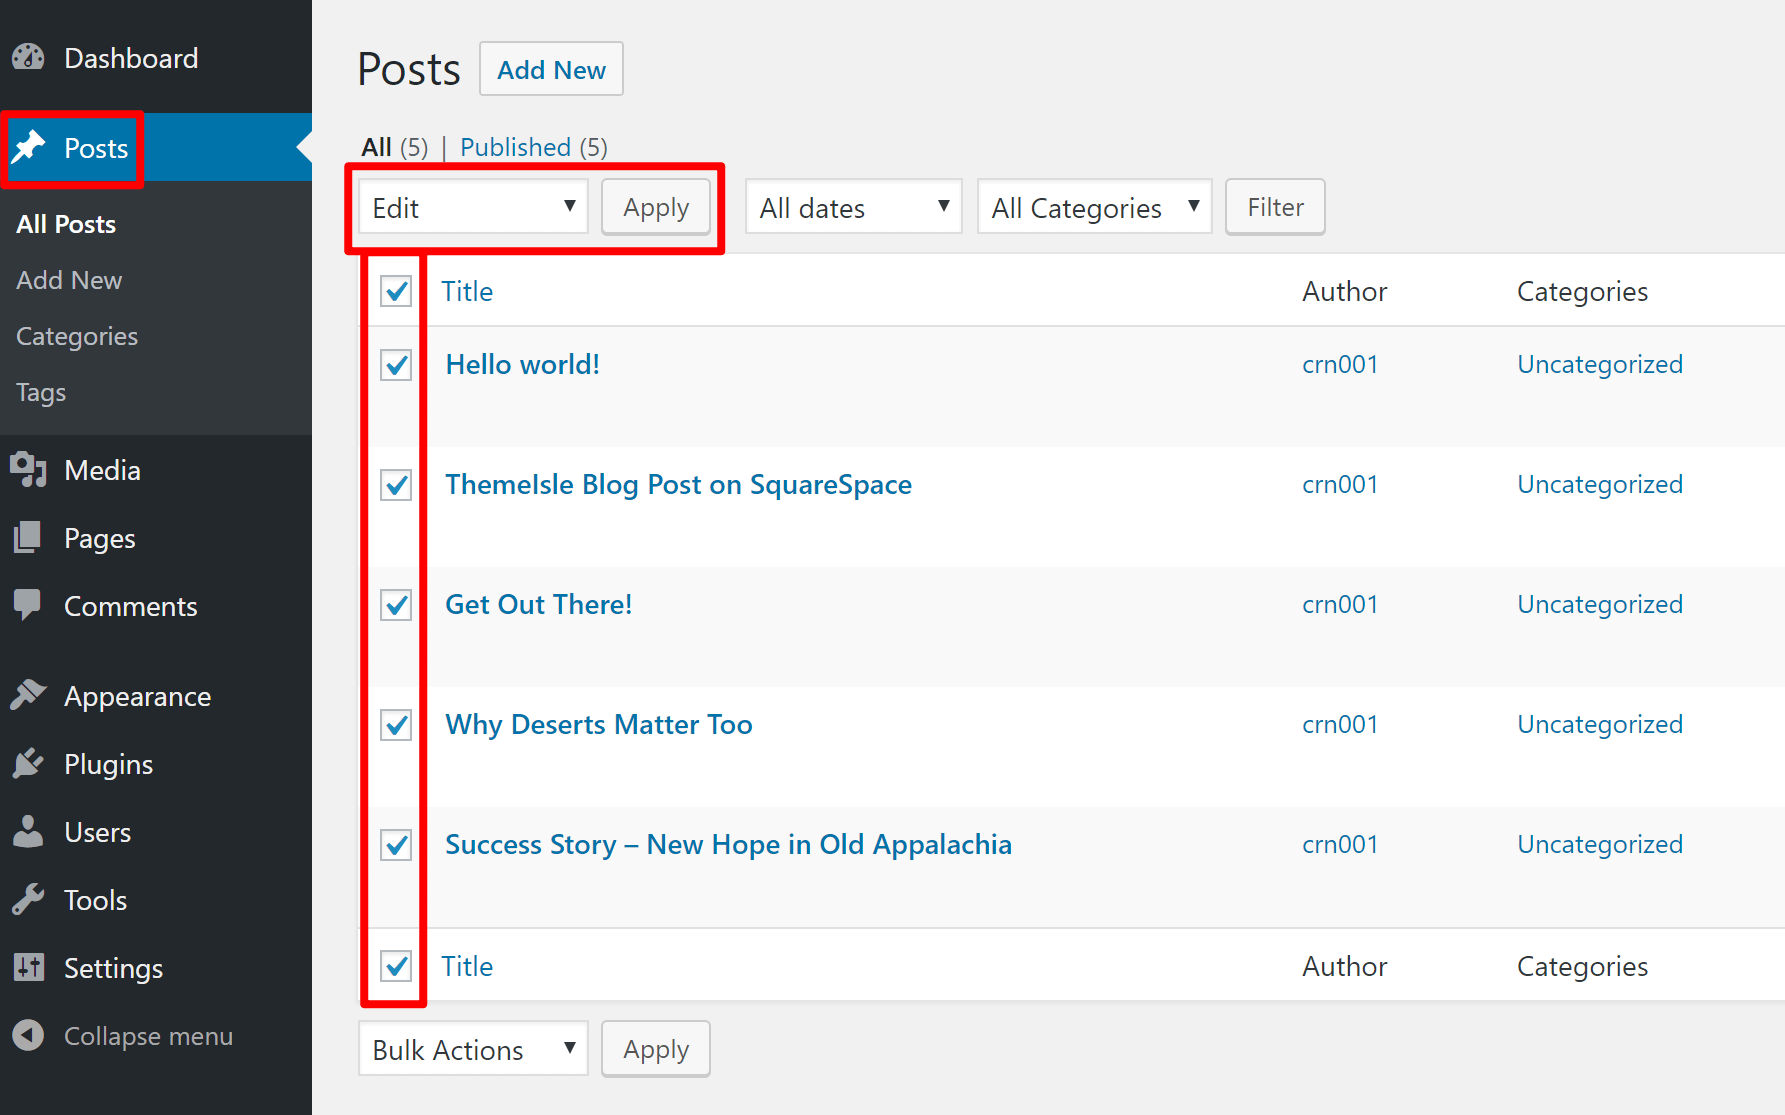 Select all posts